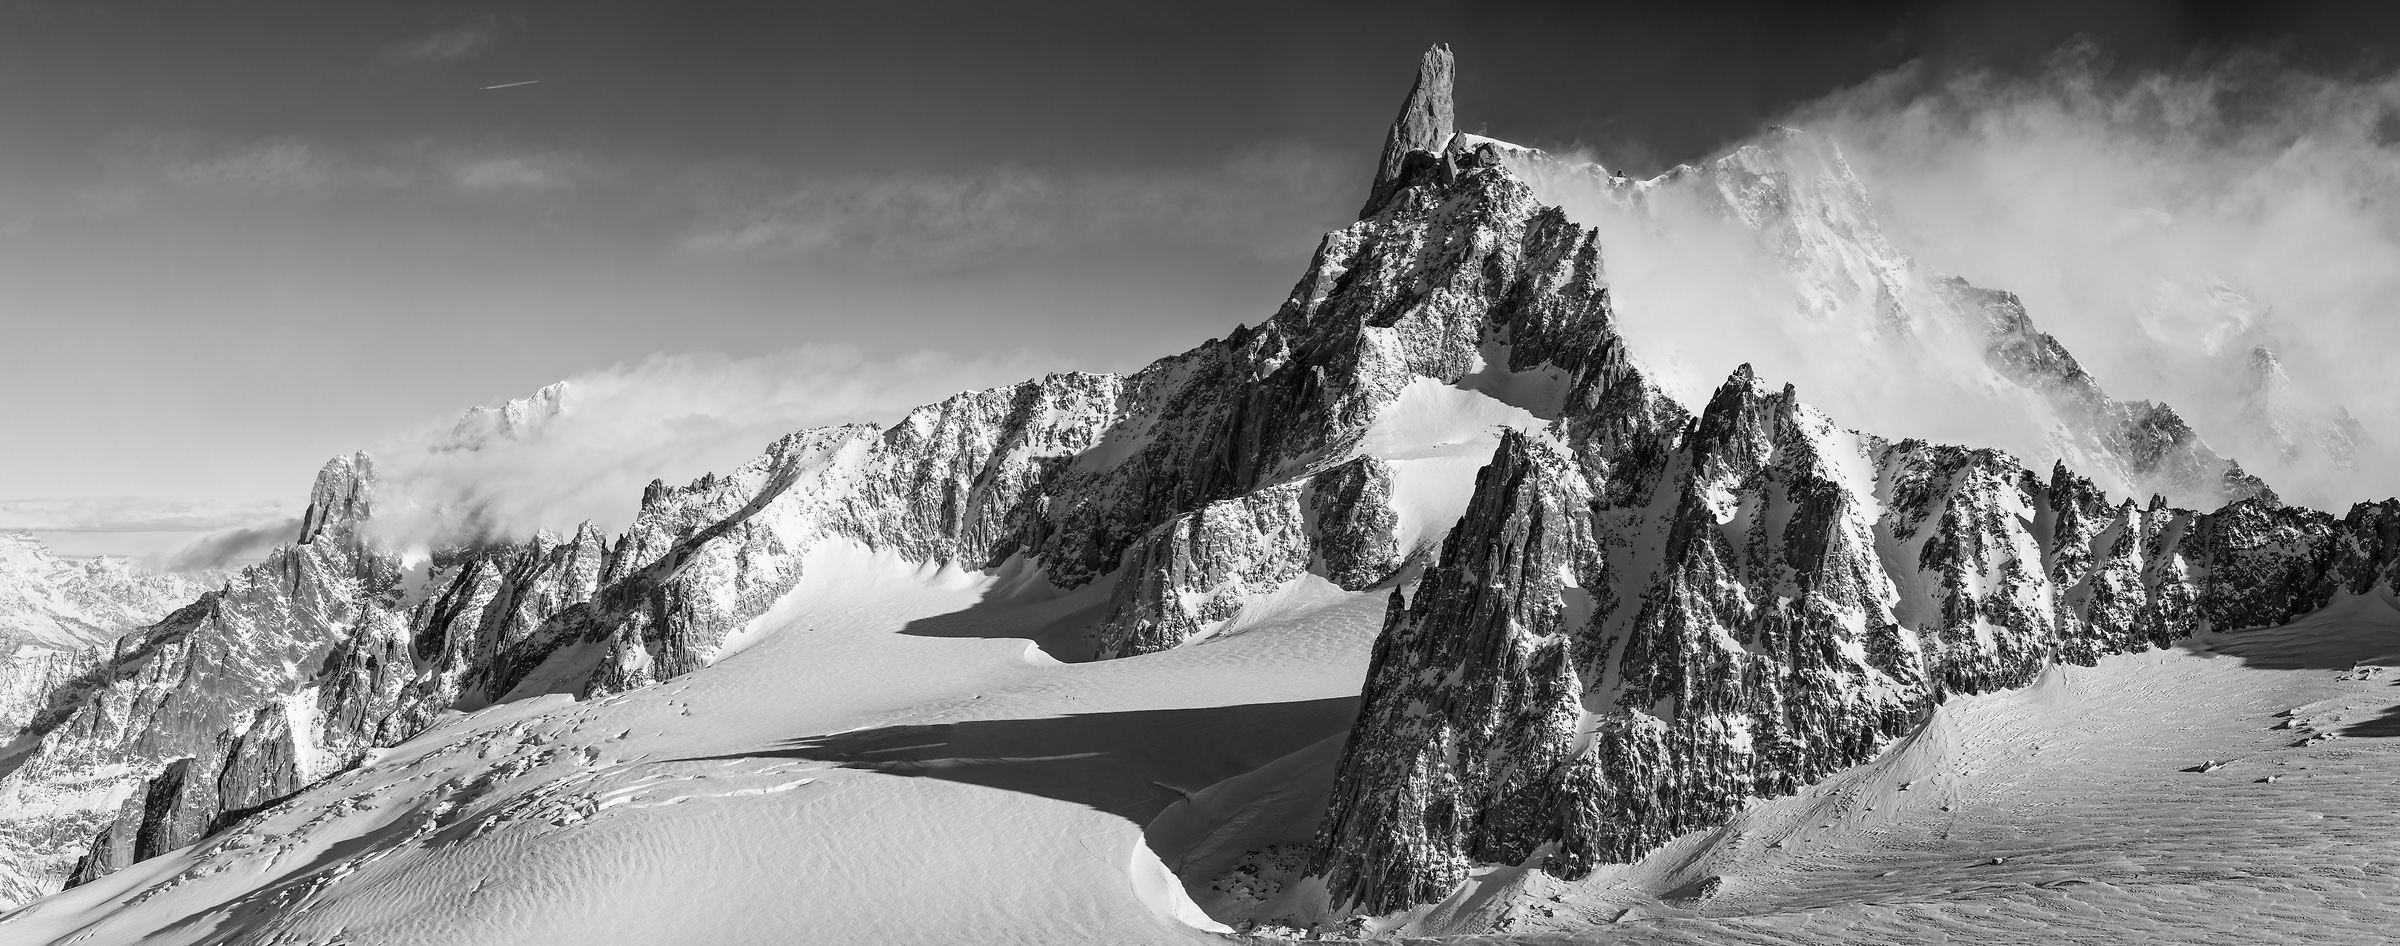 2,864 megapixels! A very high resolution, large-format, black & white VAST photo print of a mountain range in the Alps; landscape photograph created by Duilio Fiorille of La Dent du Géant of the Rochefort ridge in Punta Helbronner, Courmayeur, Italy.